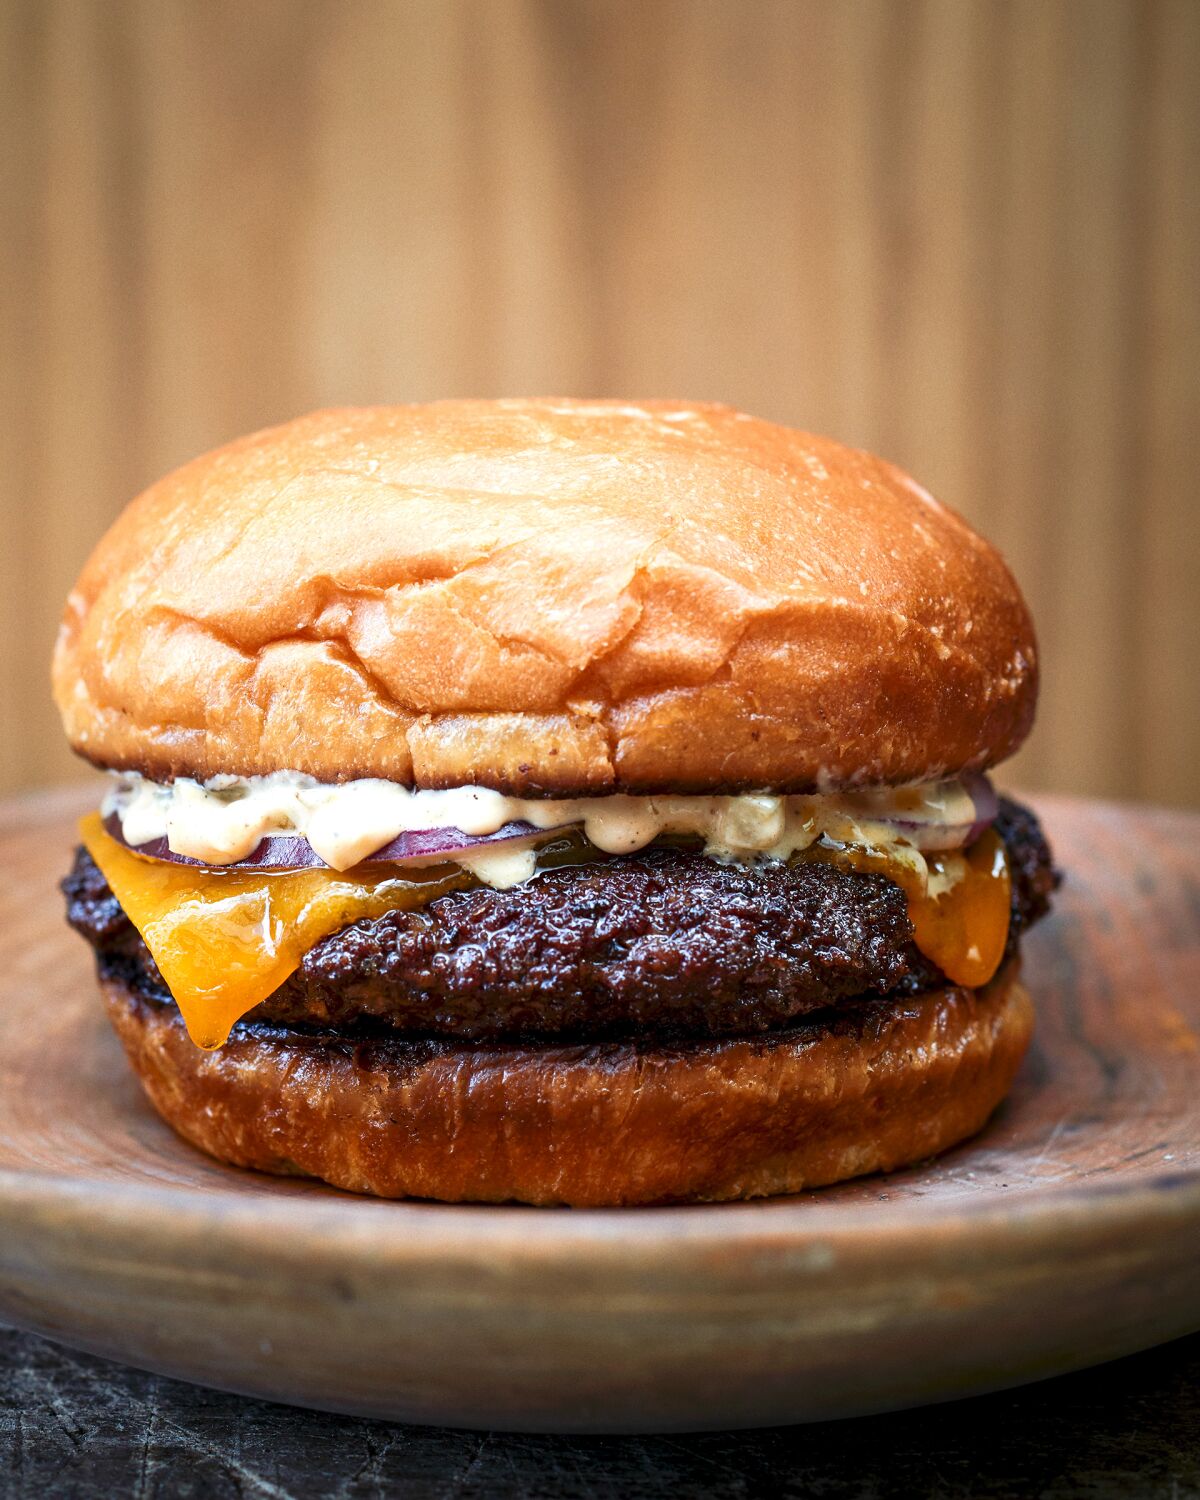 The new cheeseburger from Noma